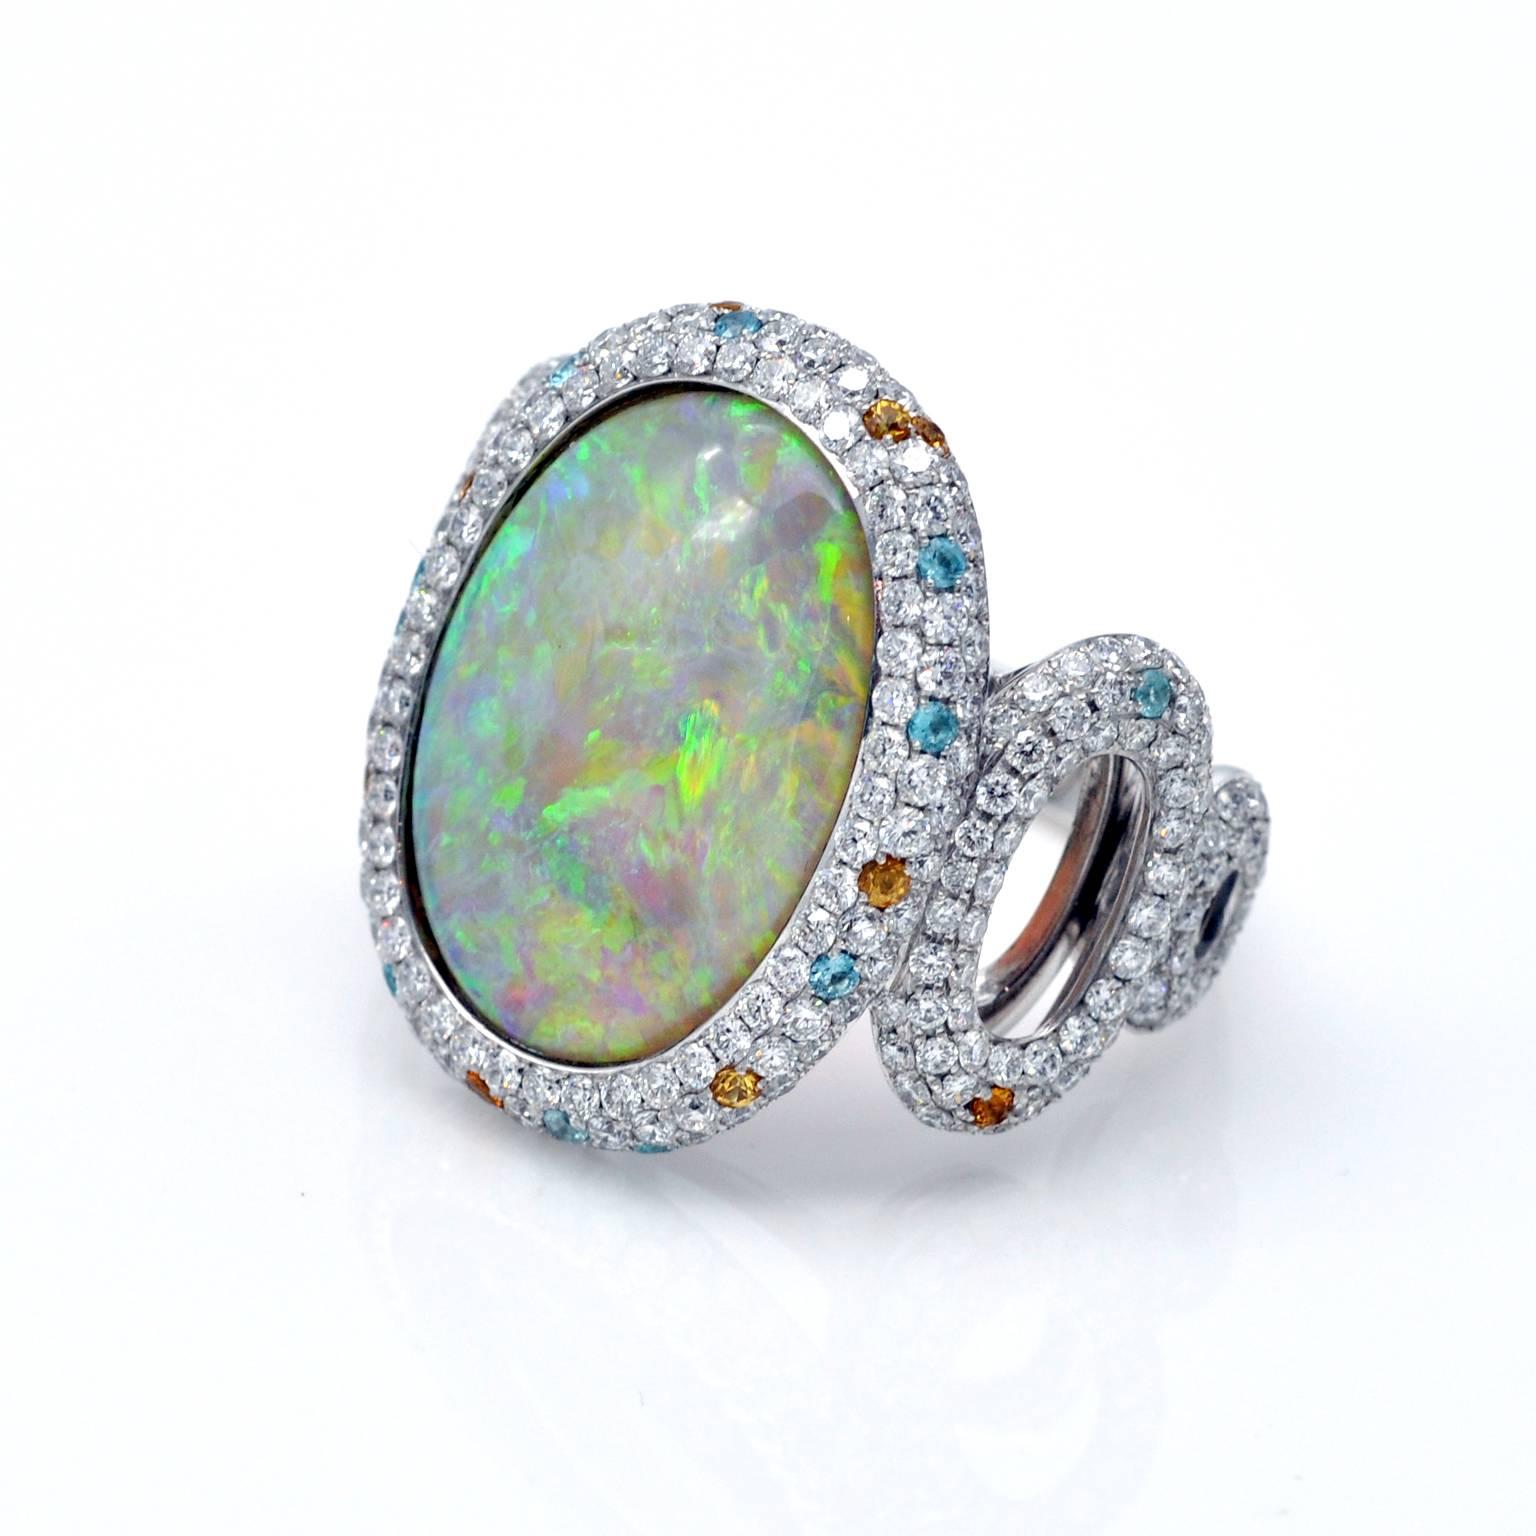 Amazing Australian opal set in a wide modern cocktail ring pavé set with white diamond, highlighted with brillant cut multicolored stones.

Opal 8.35 carats, diamonds 2.10 carats